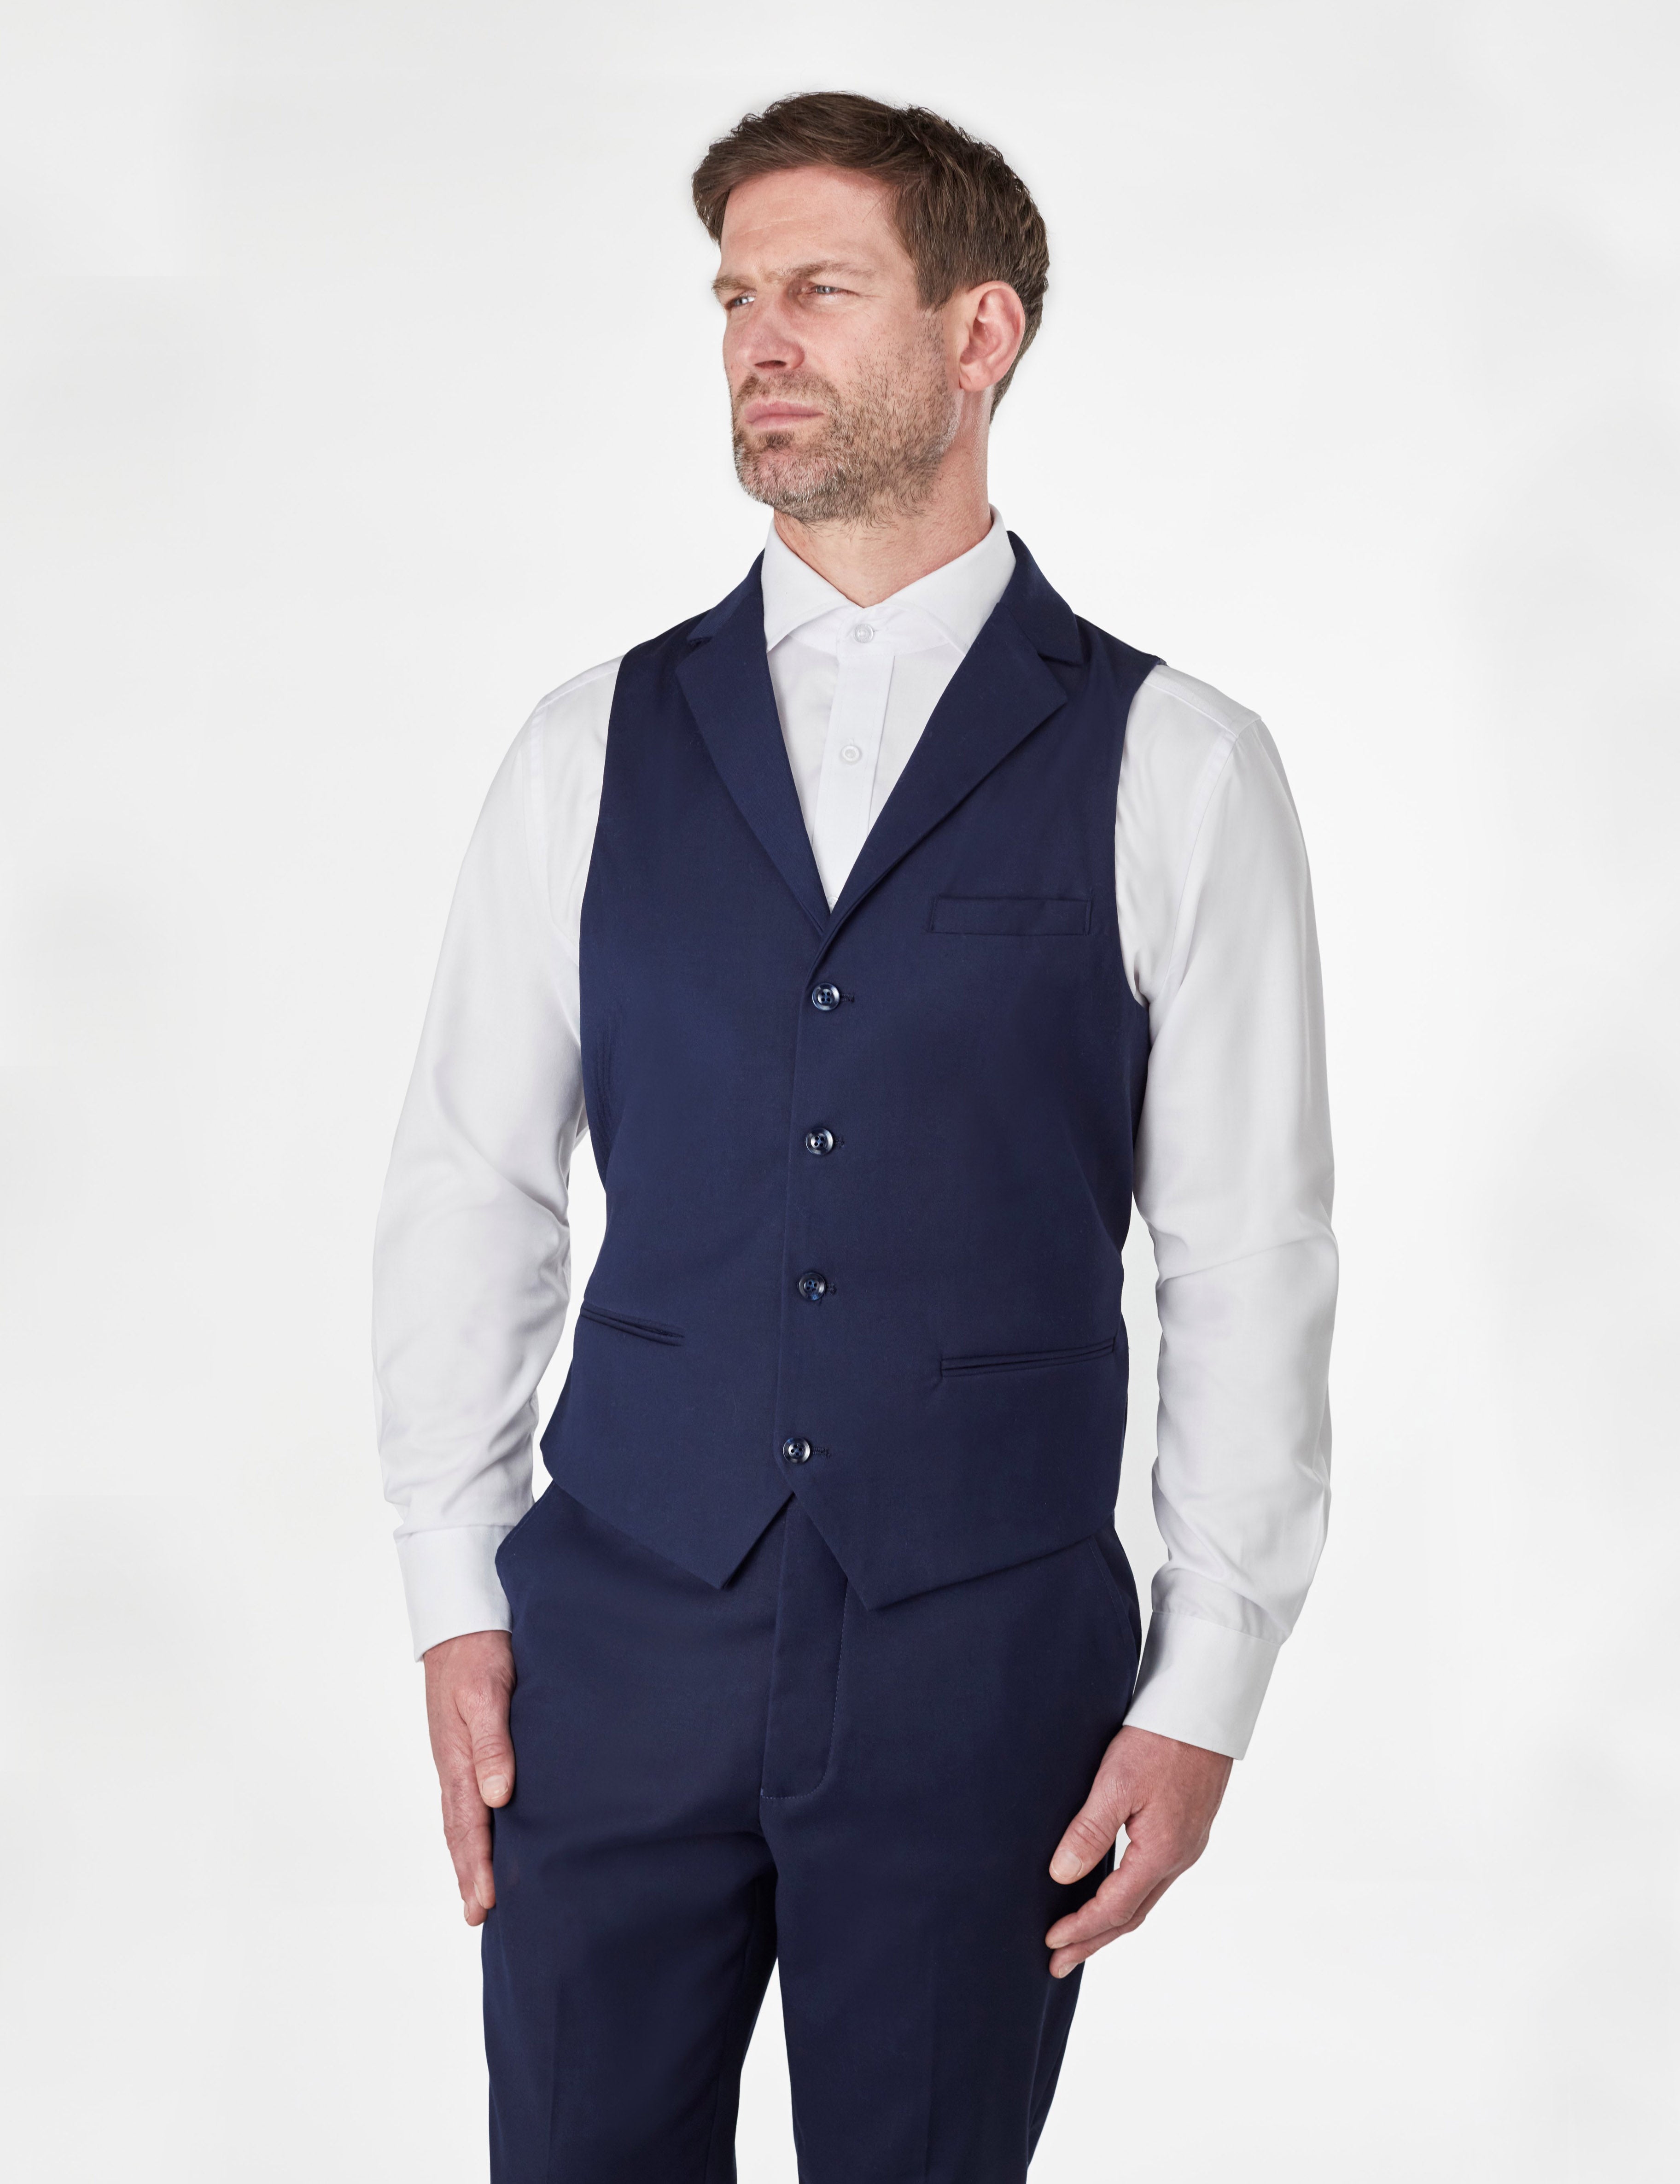 GRAHAM - NAVY DOUBLE BREASTED SUIT